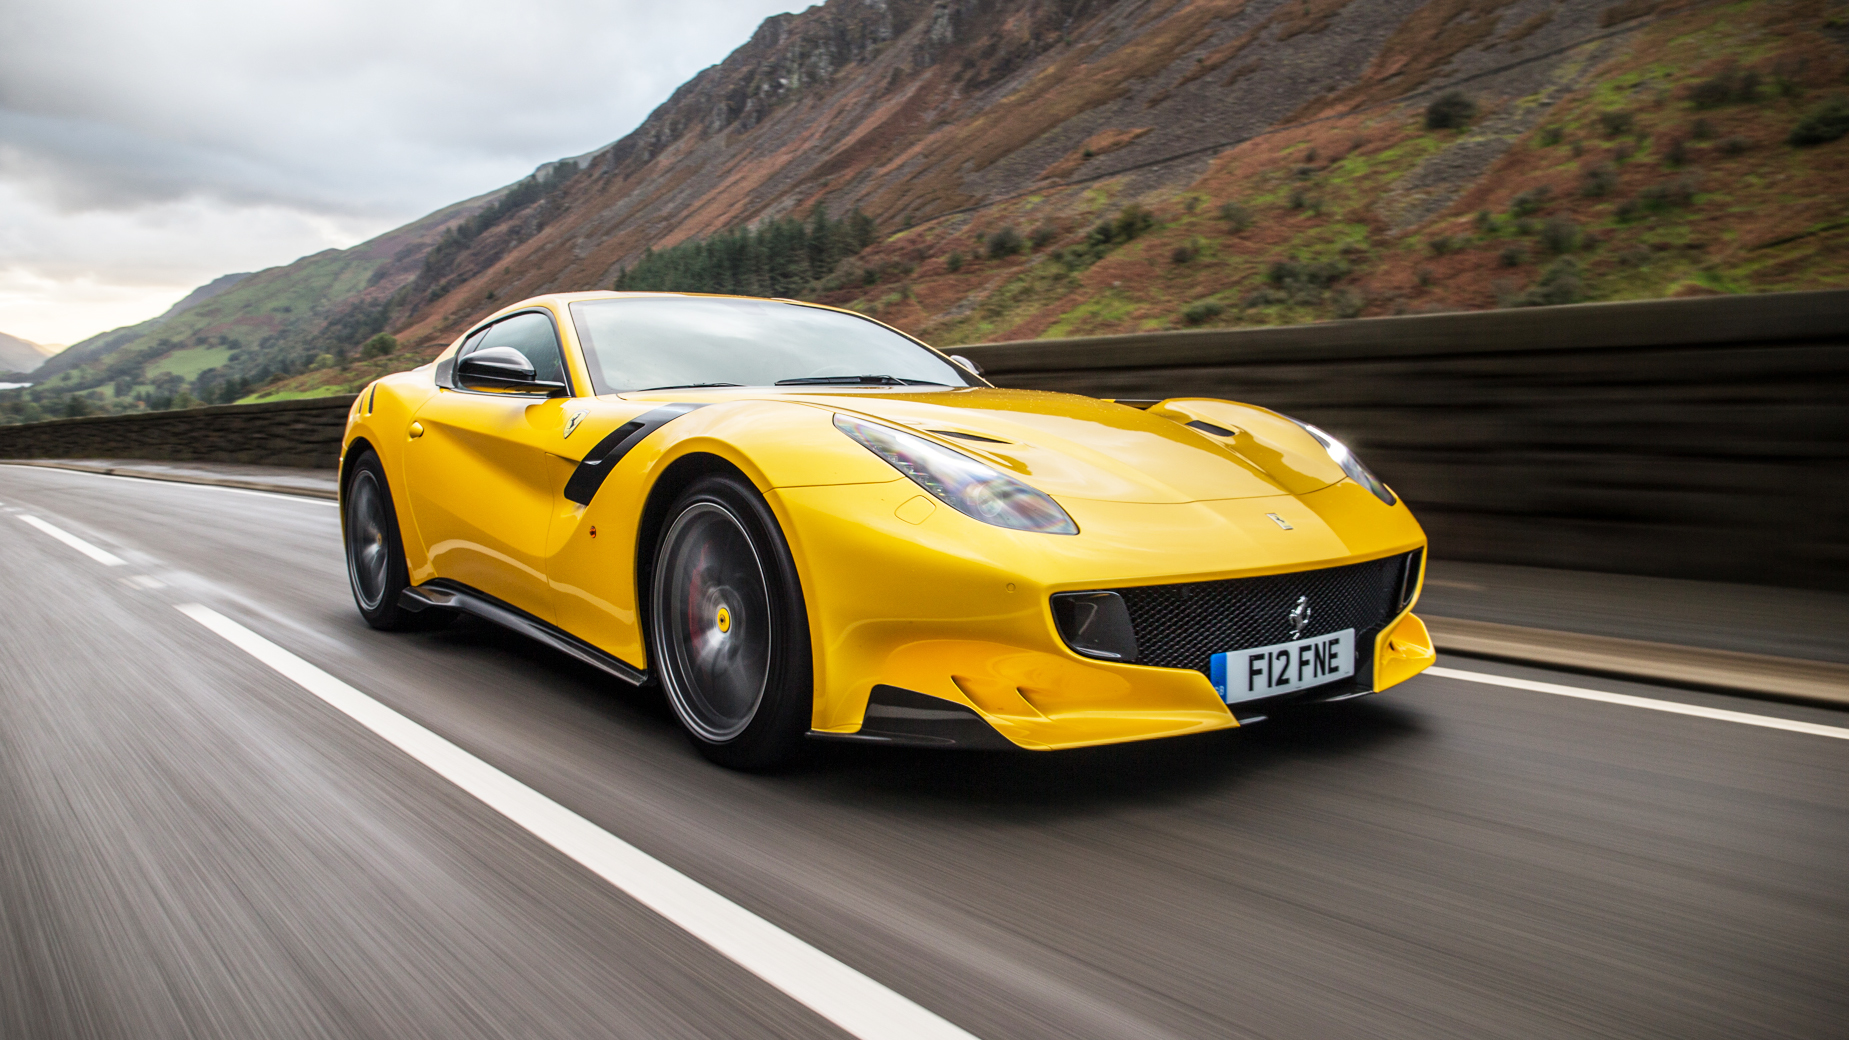 Ferrari F12 tdf review: 770bhp hypercar tested in the UK Reviews 2023 | Top  Gear